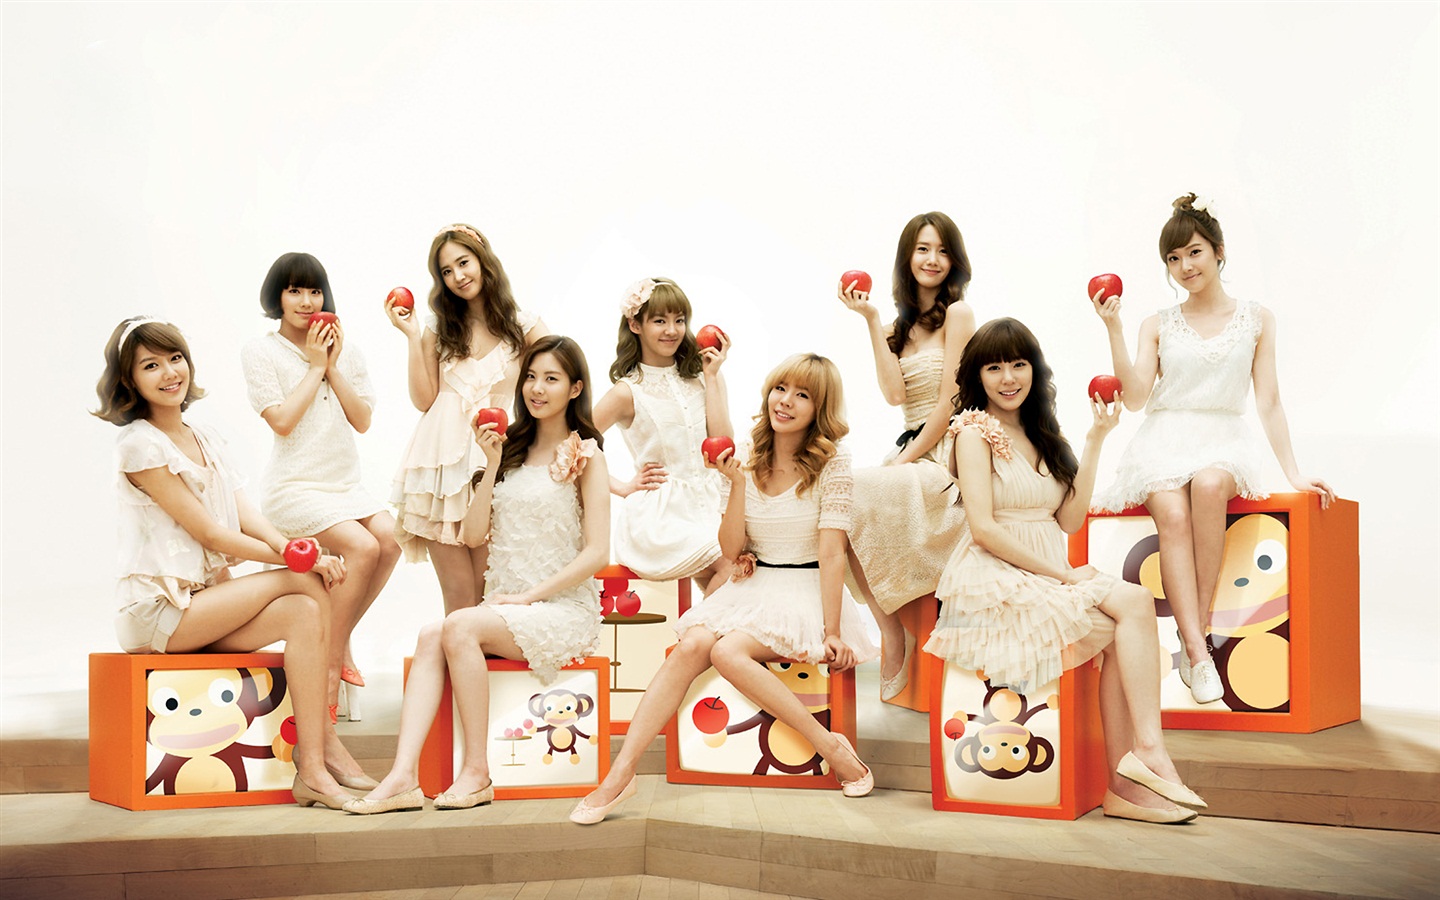 Girls Generation latest HD wallpapers collection #16 - 1440x900